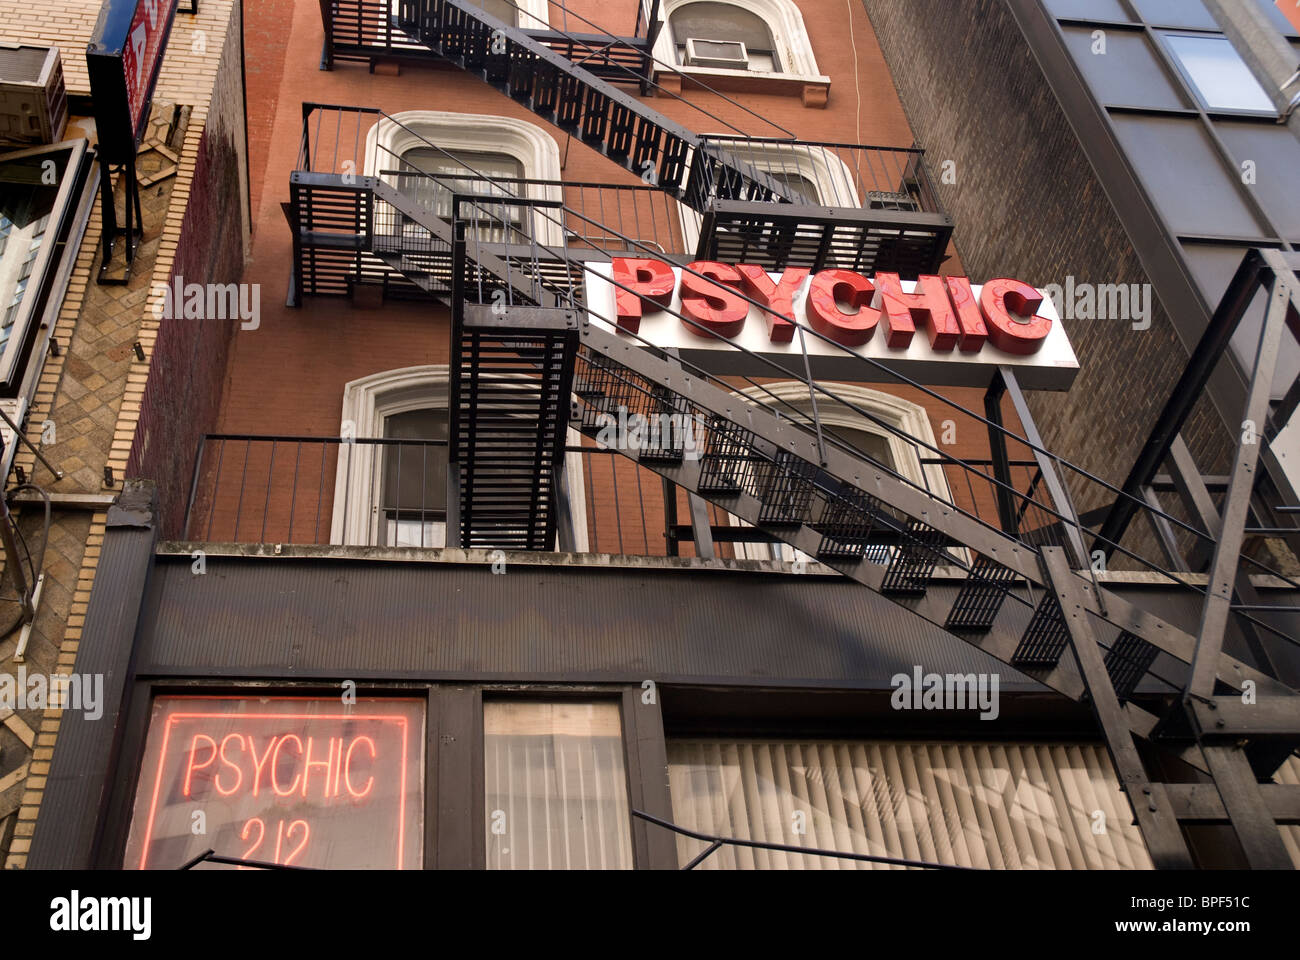 Psychic sign on  building in Harlem New Youk City Stock Photo